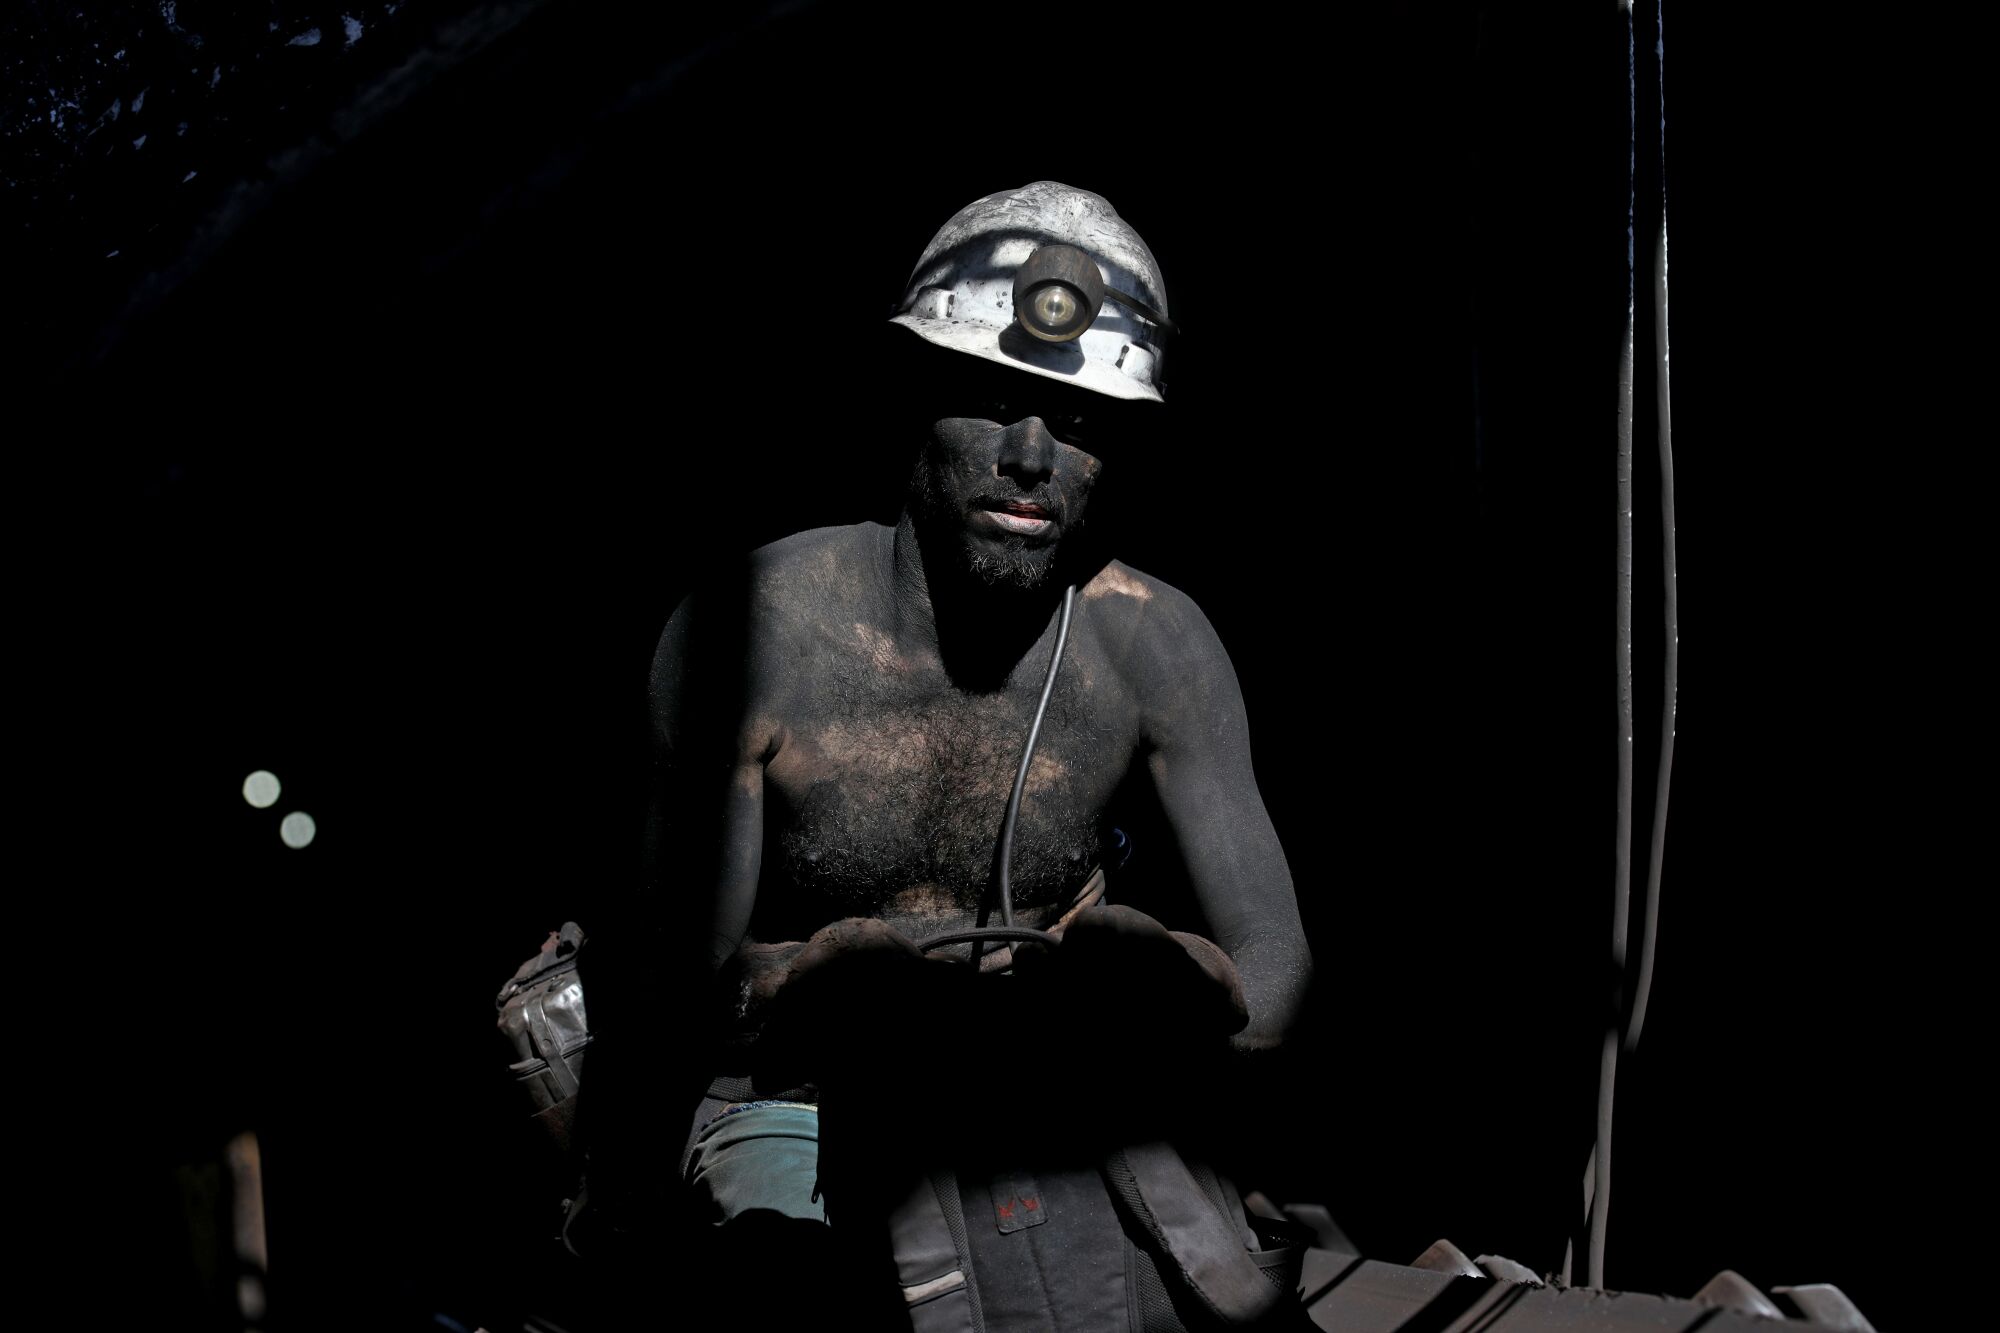 A man wears a mining helmet and is covered in soot.